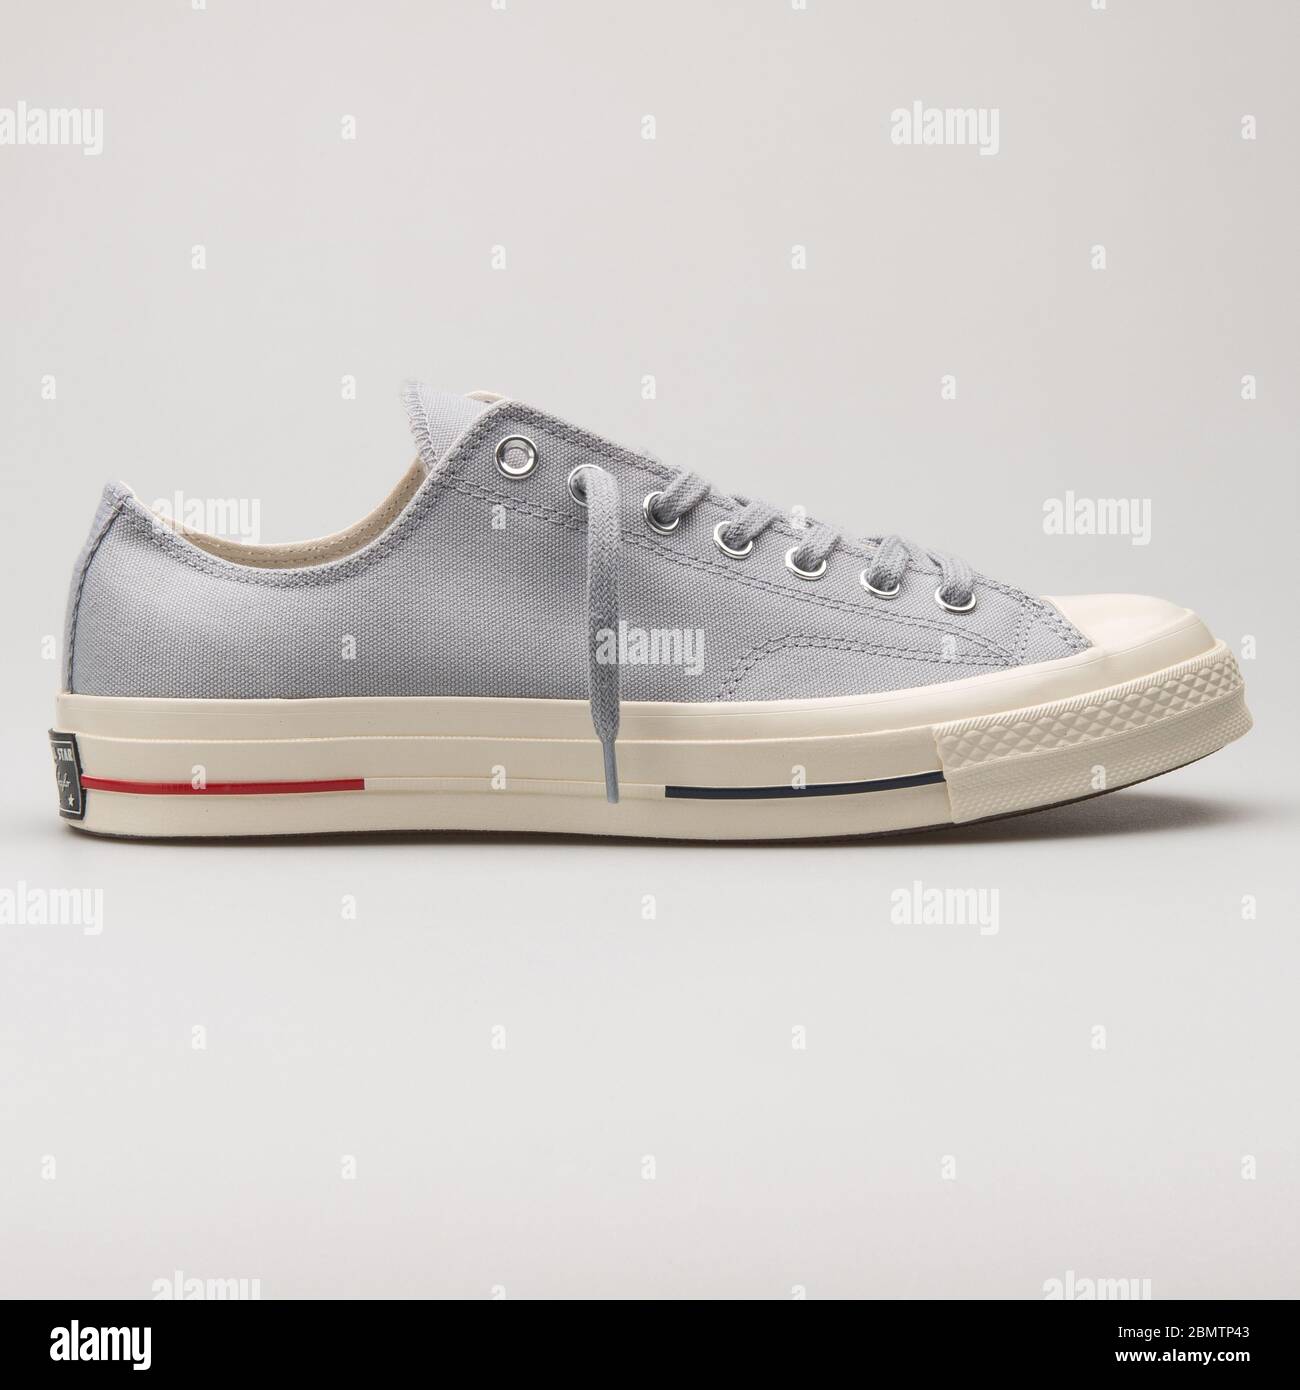 VIENNA, AUSTRIA - FEBRUARY 19, 2018: Converse Chuck Taylor All Star 70 OX  grey and white sneaker on white background Stock Photo - Alamy